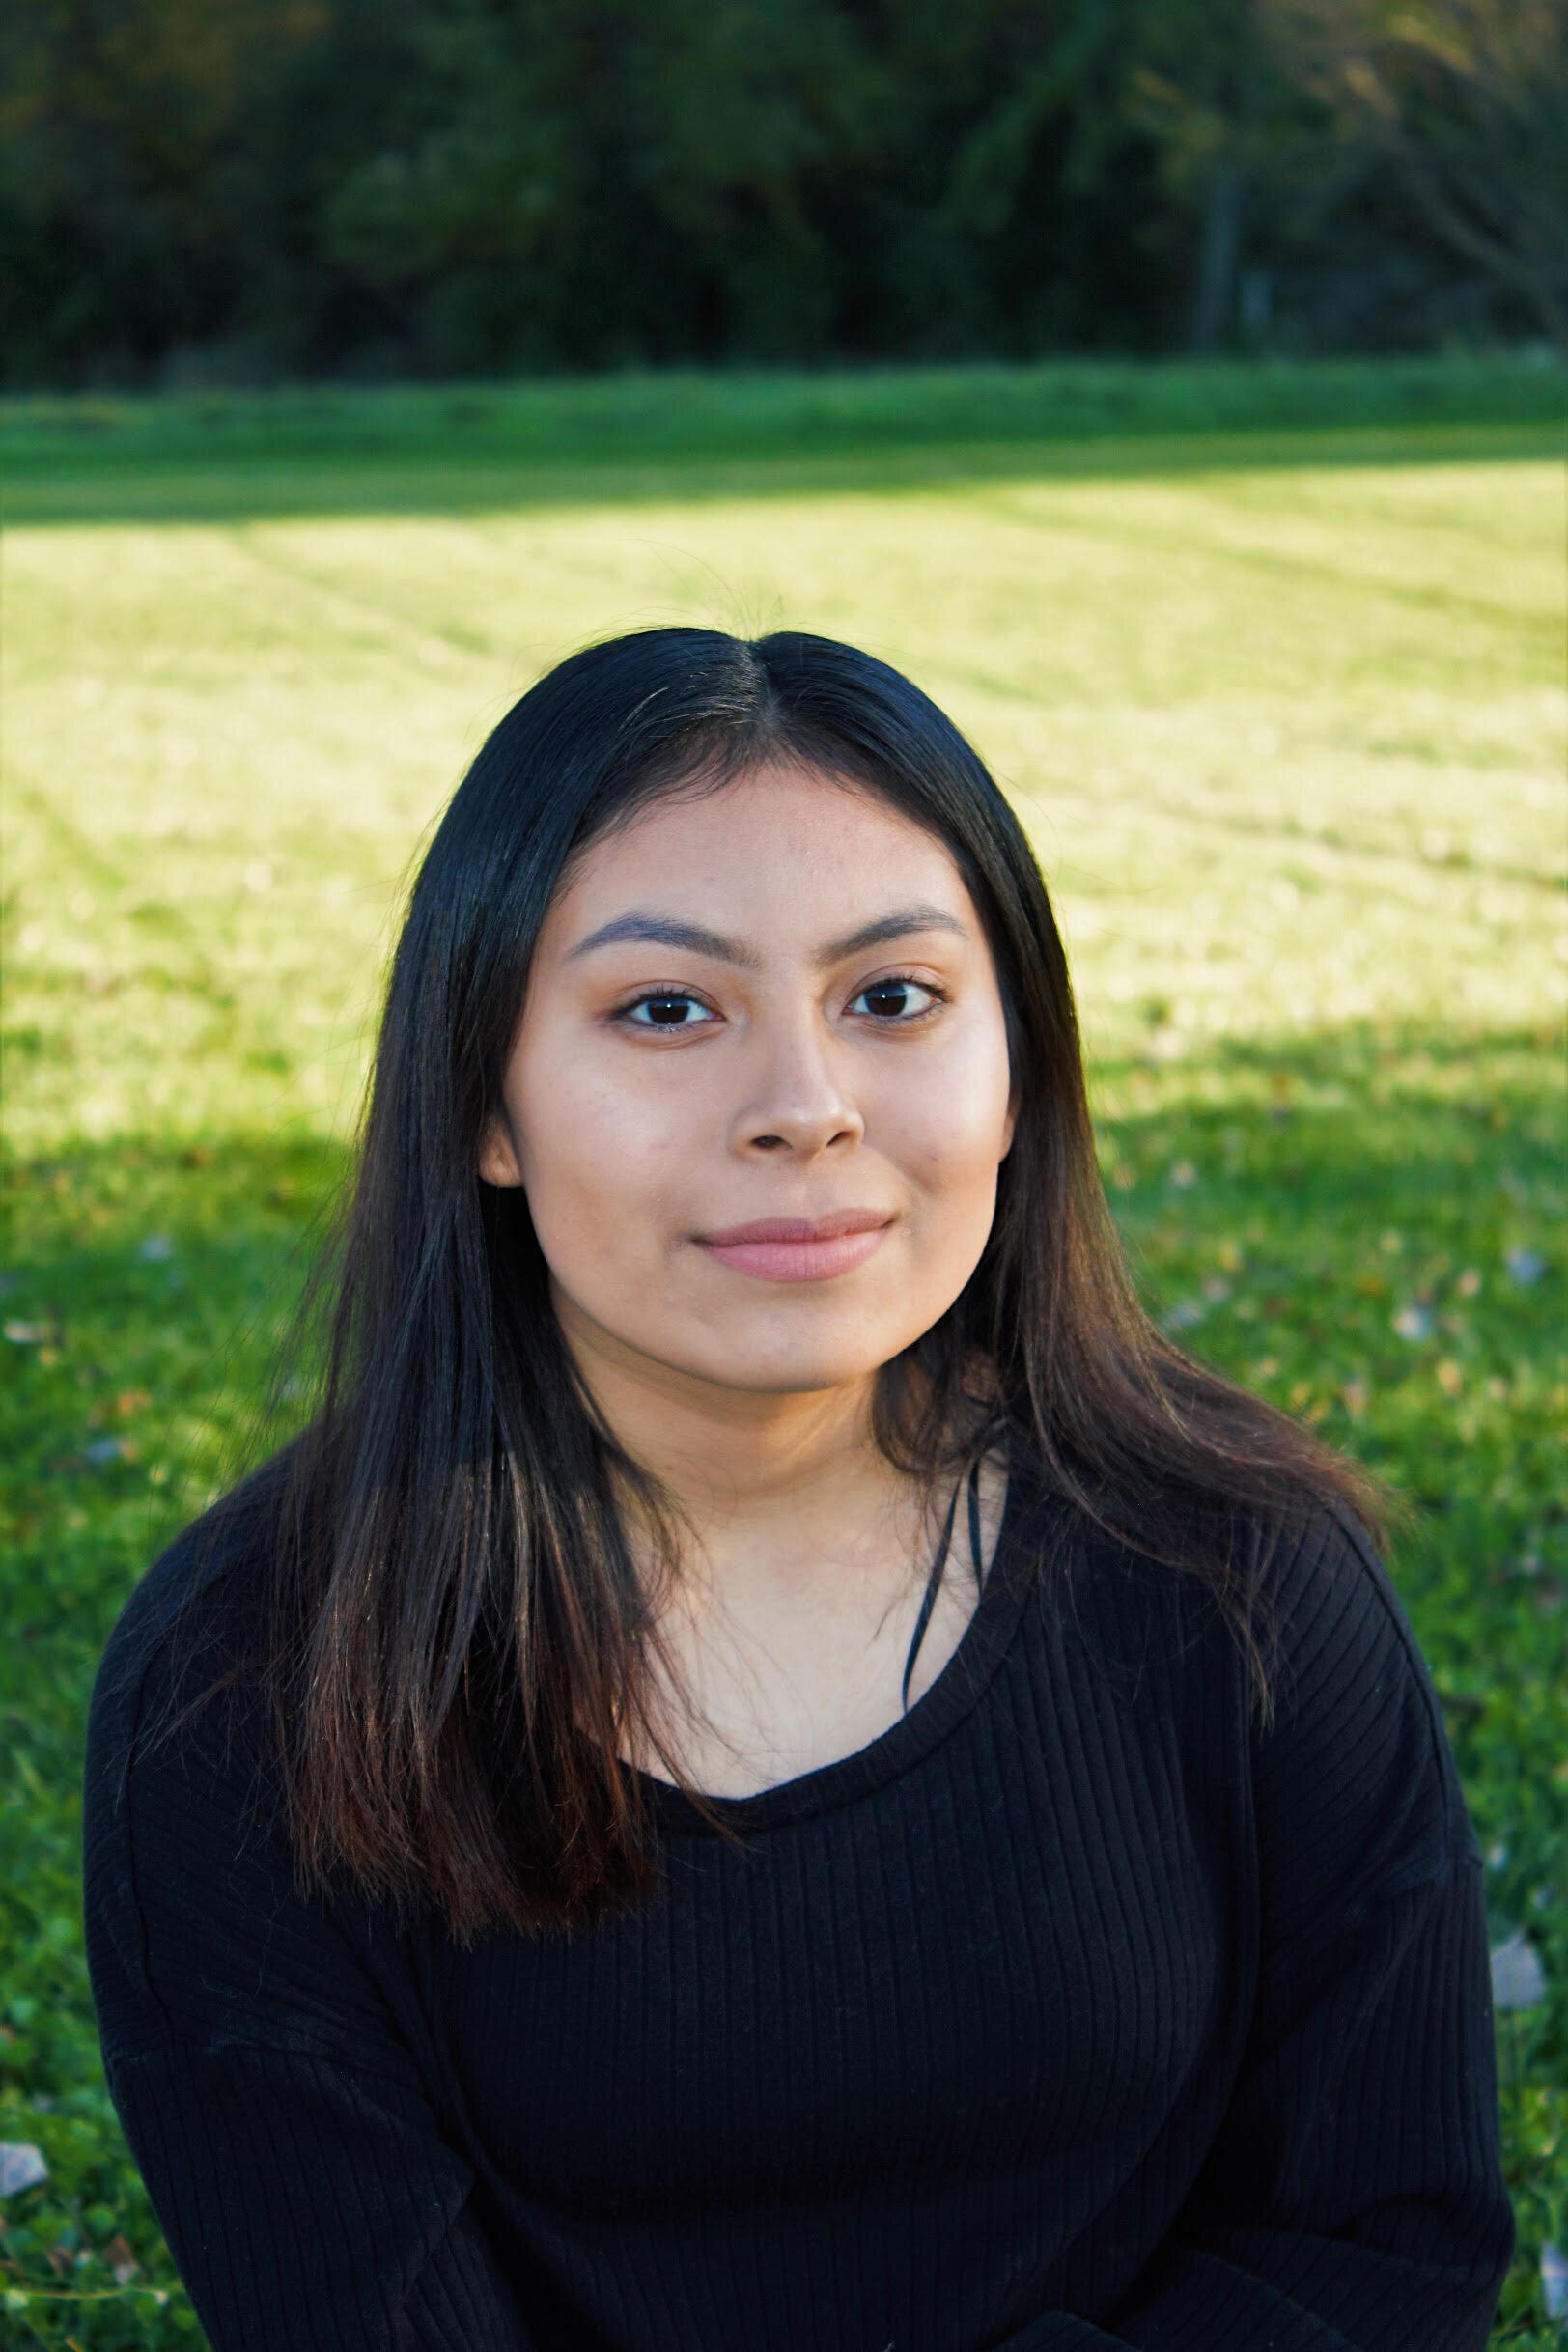  Maria Xelhua - Madison West High School   Besides going to school, what do you do?  Work, family care, exercise    What are your future dreams and goals?  Have a career as a Physician Assistant, having a family and home.   How would you encourage ot